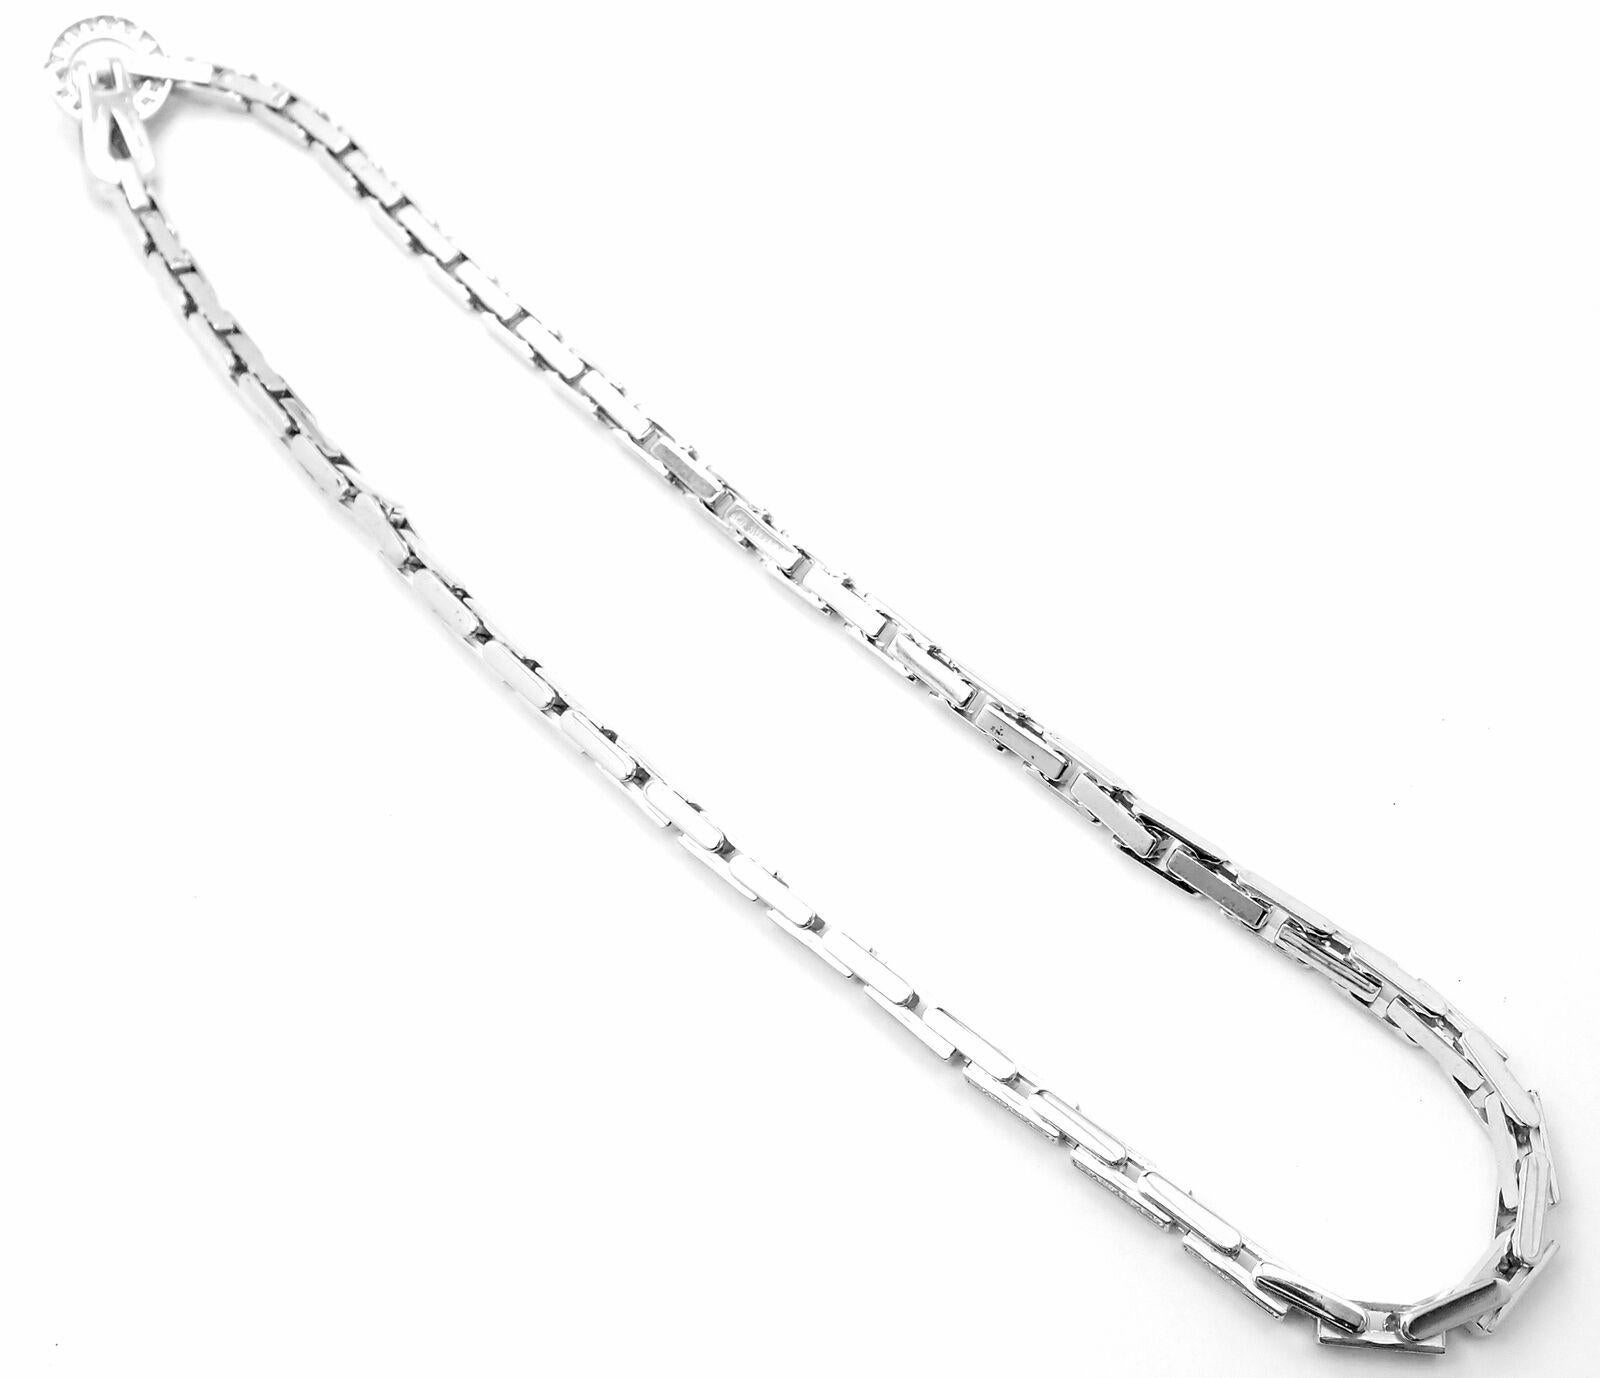 Cartier Agrafe Full Diamond Link White Gold Necklace Certificate In Excellent Condition For Sale In Holland, PA